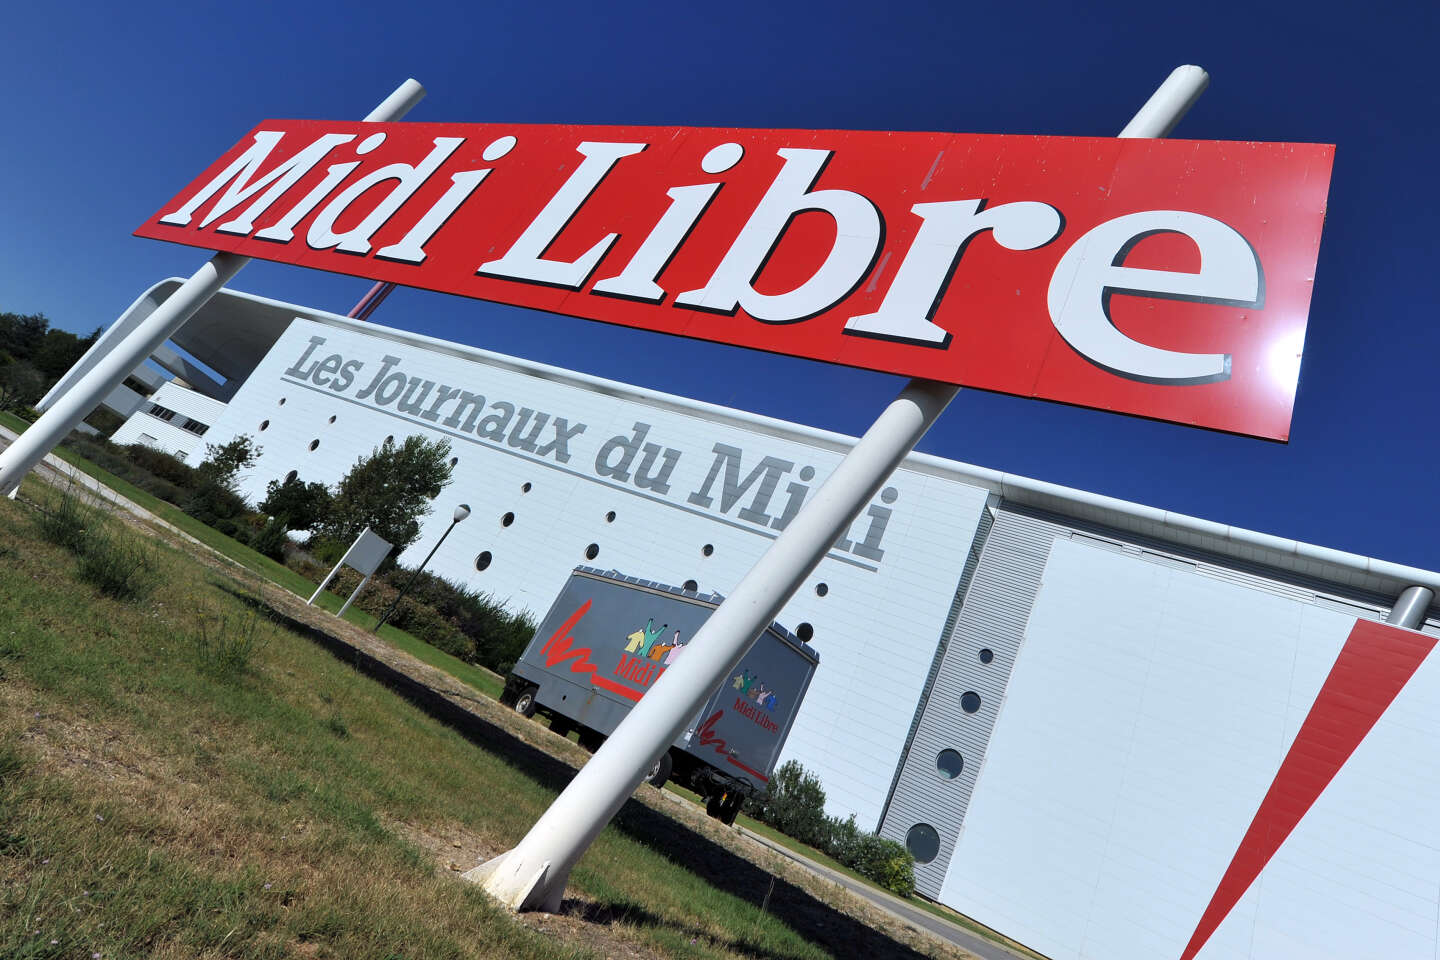 The newspaper “Midi libre” announces a forced departure plan which will mainly affect “the youngest employees”